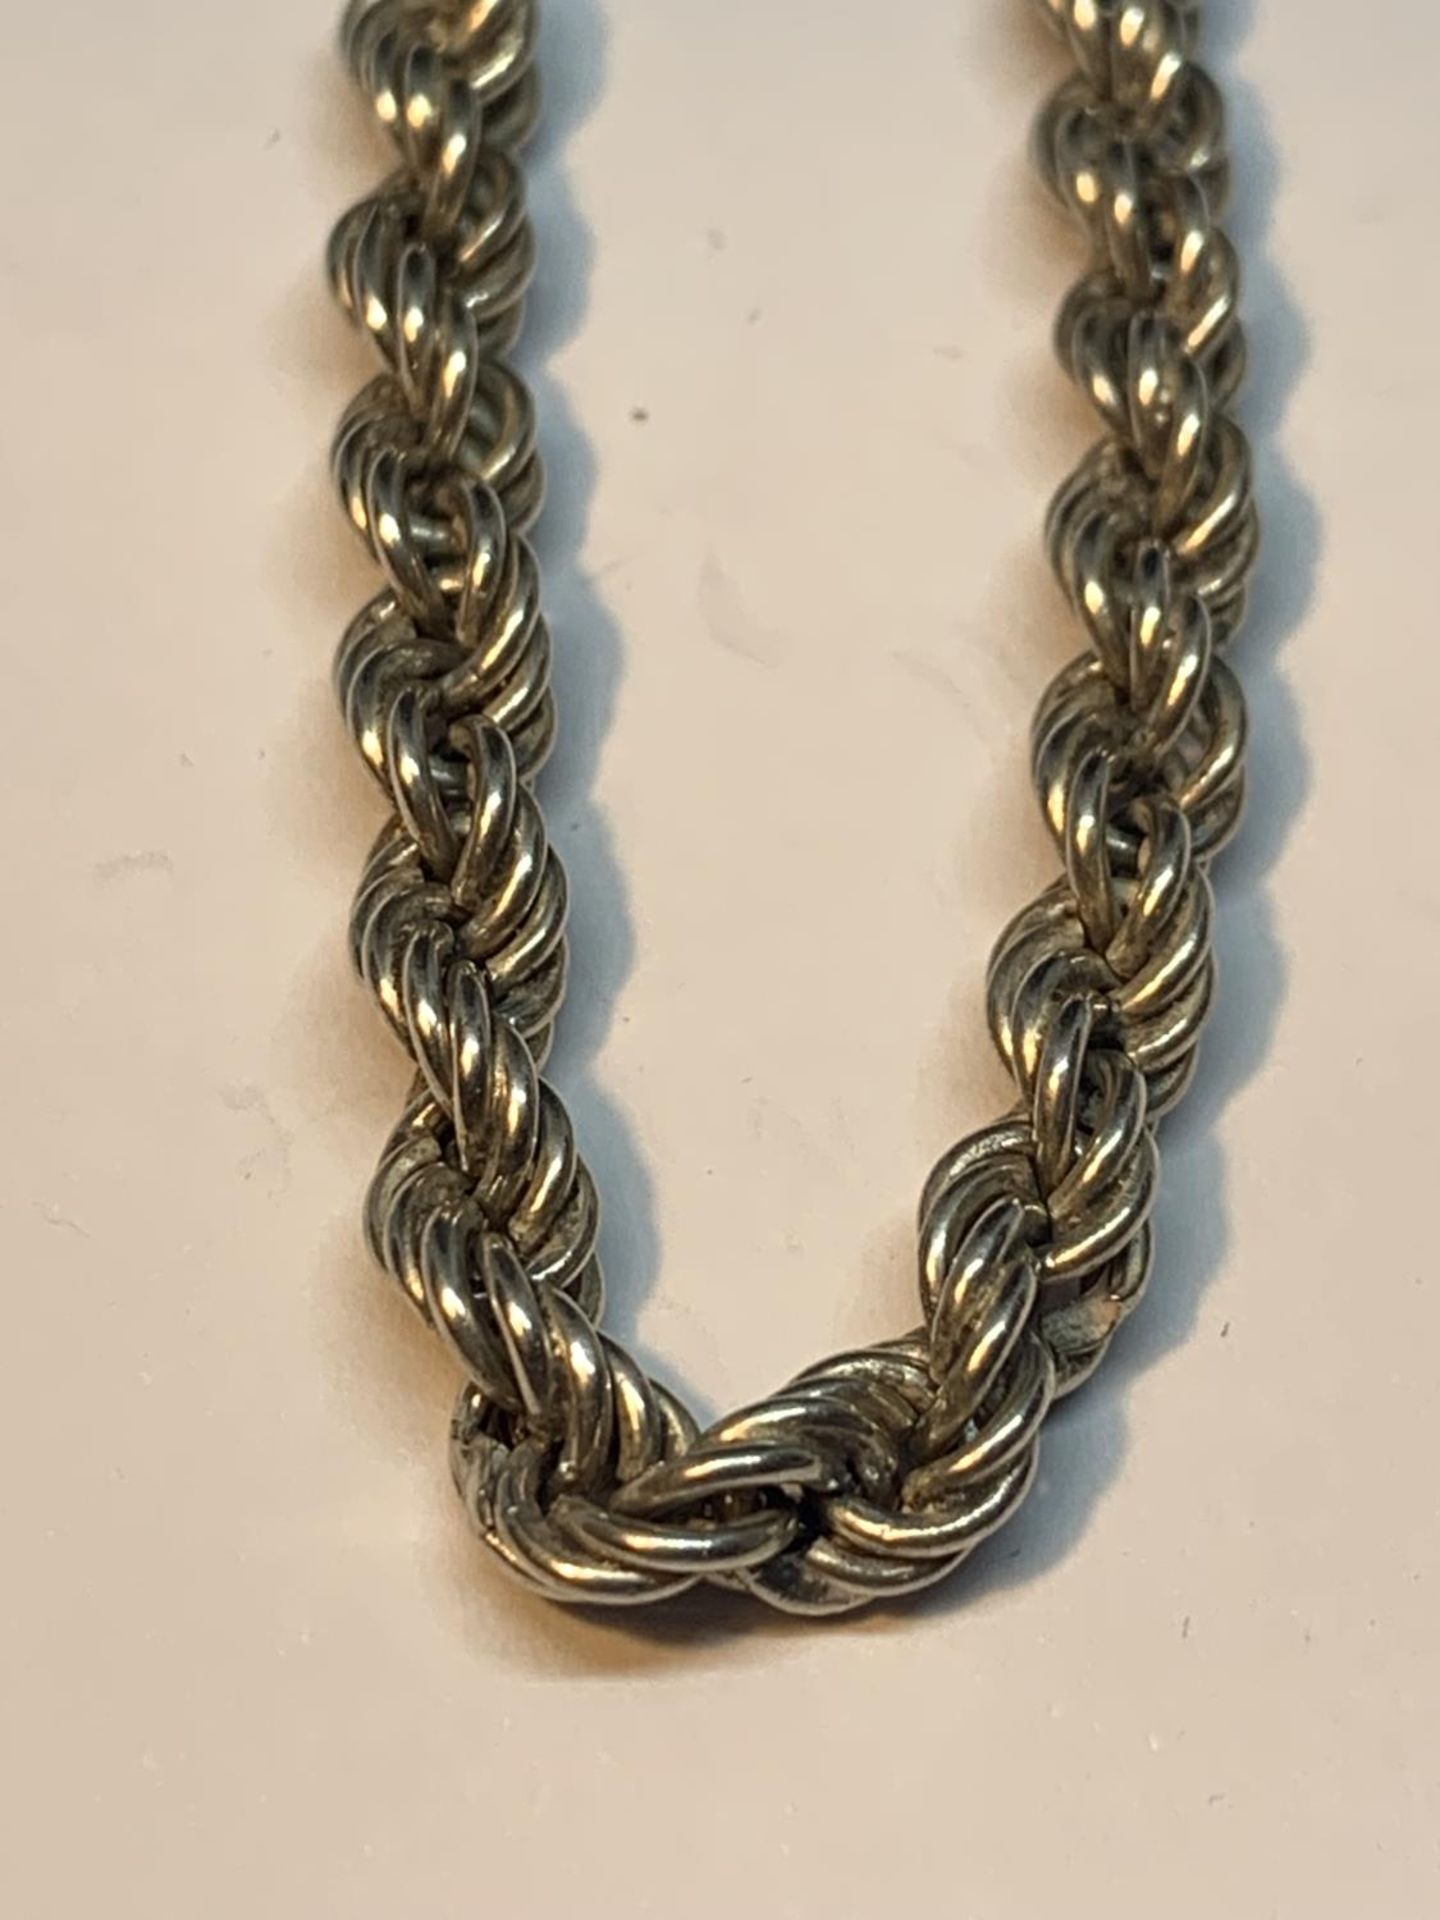 A SILVER ROPE NECKLACE 16 INCHES LONG - Image 2 of 3